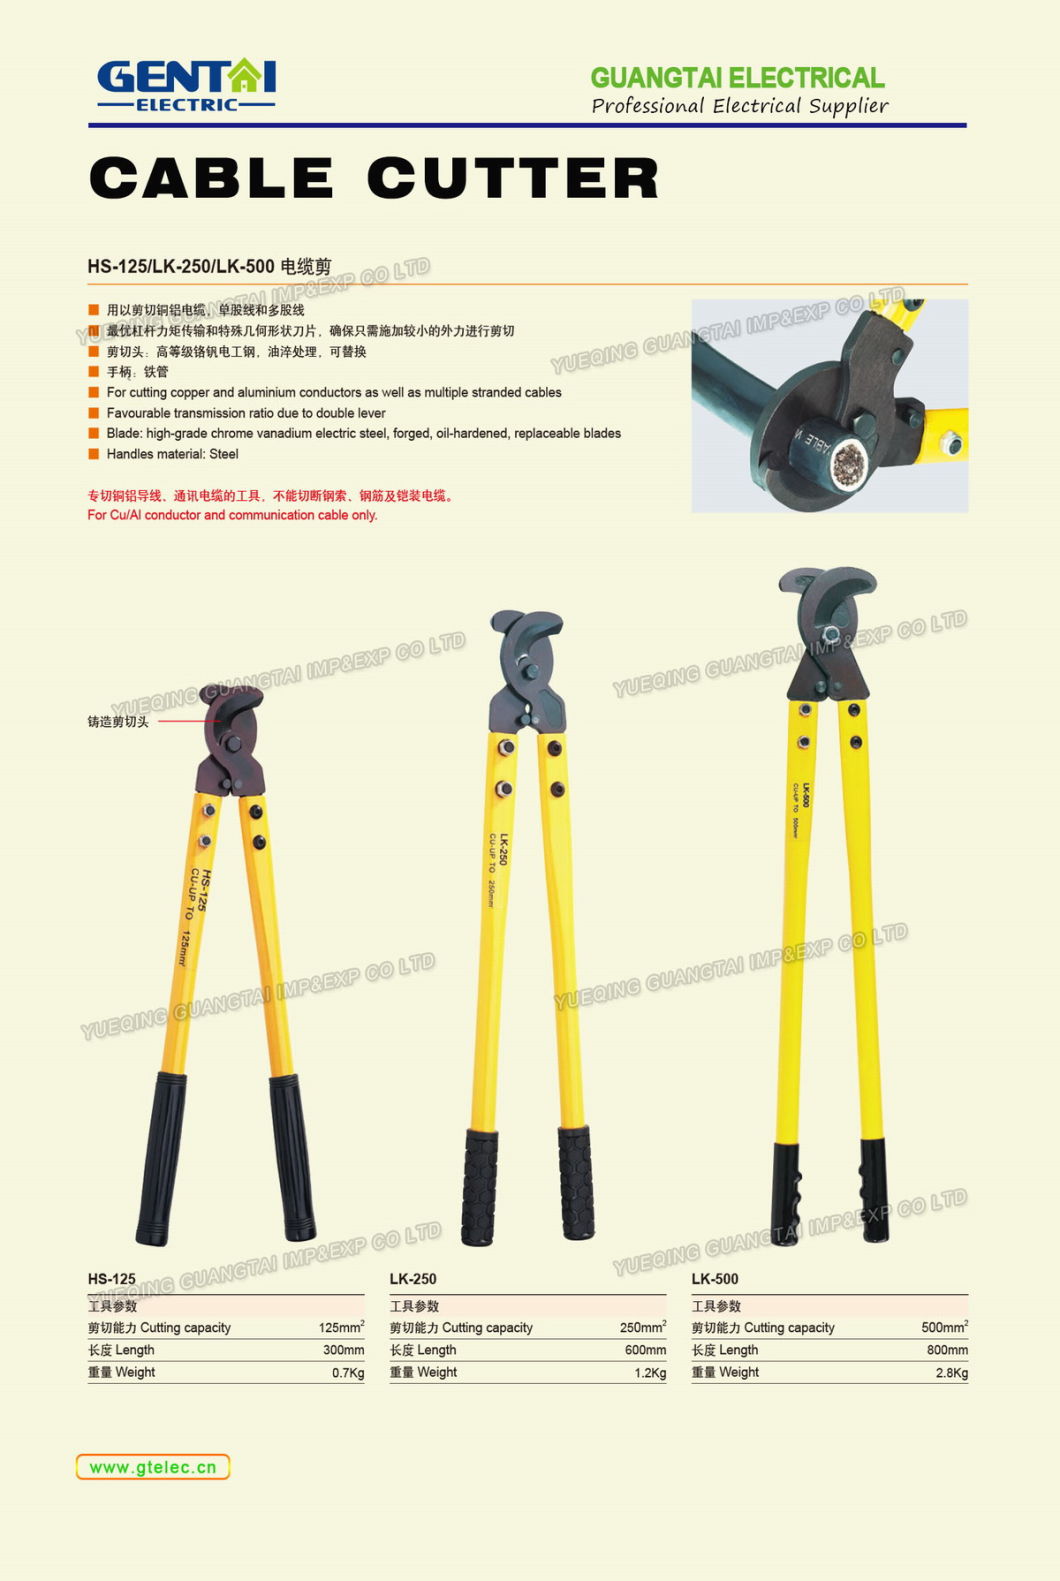 Manual Ratchet Cable Cutter for Copper Cable and Armoured Cable